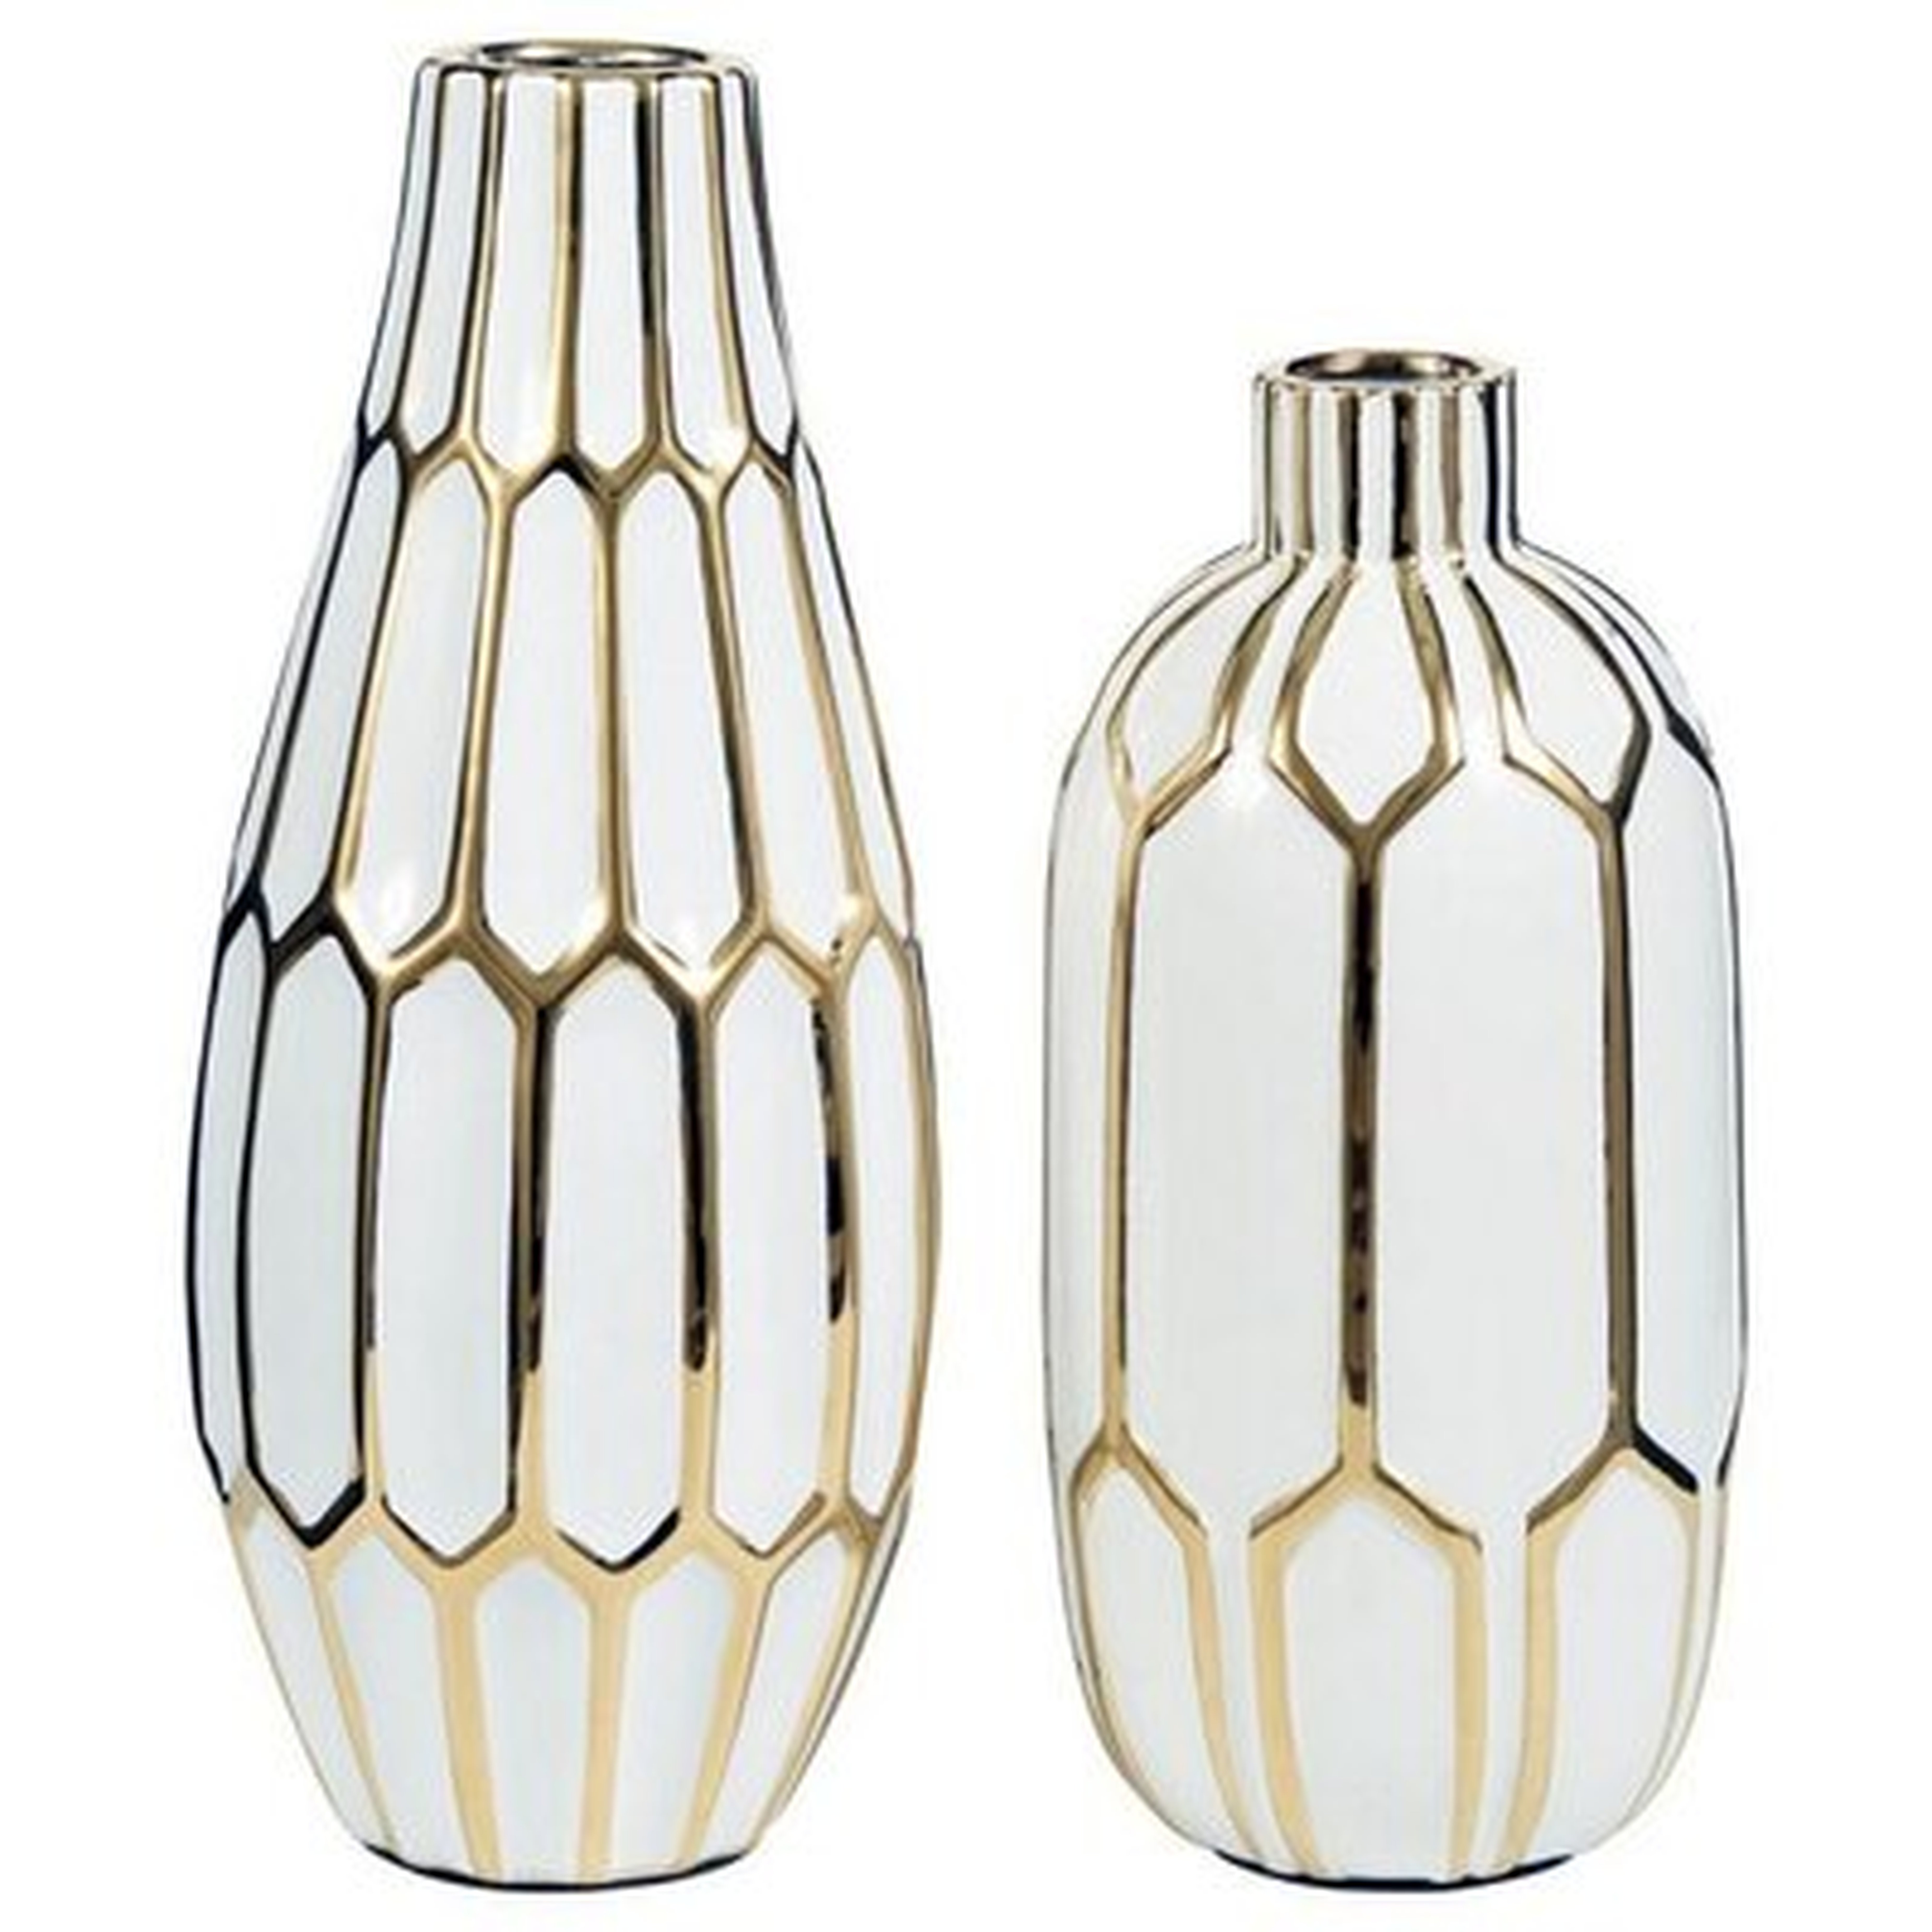 Vase With Honeycomb Geometric Design, Set Of 2, White And Gold - Wayfair